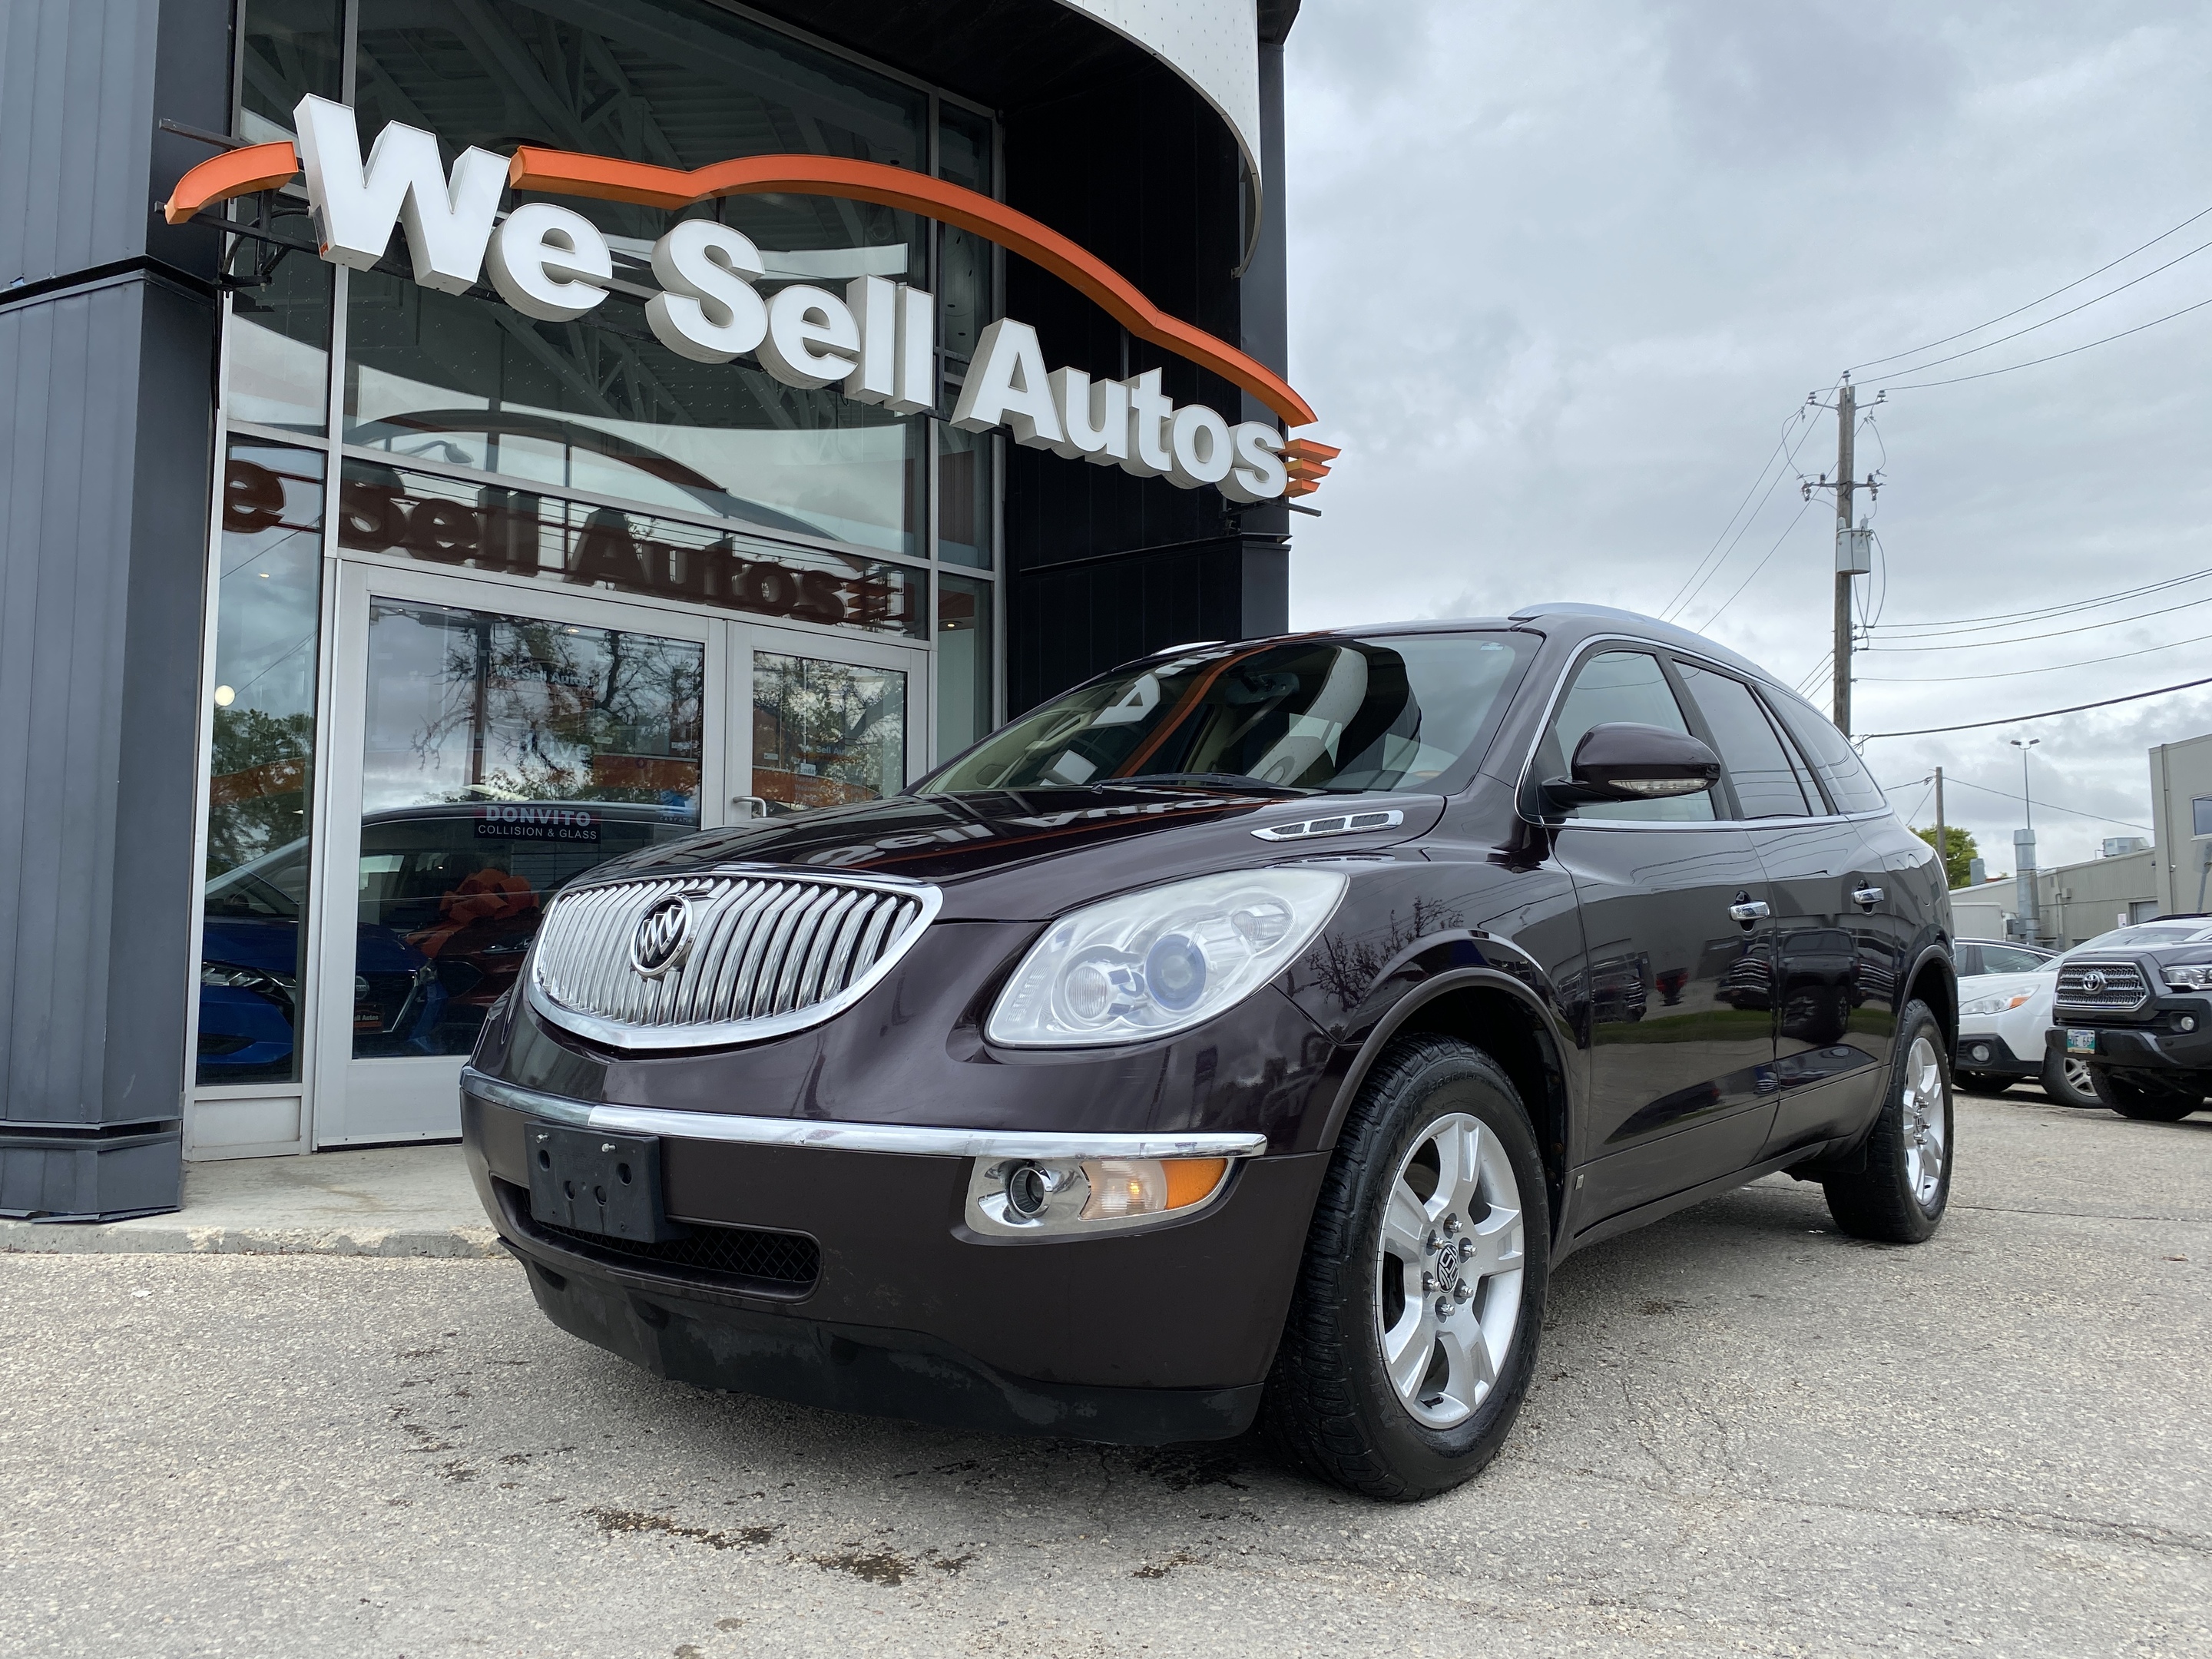 2008 Buick Enclave CXL AWD w/DVD, Power Sunroof, Leather & More!